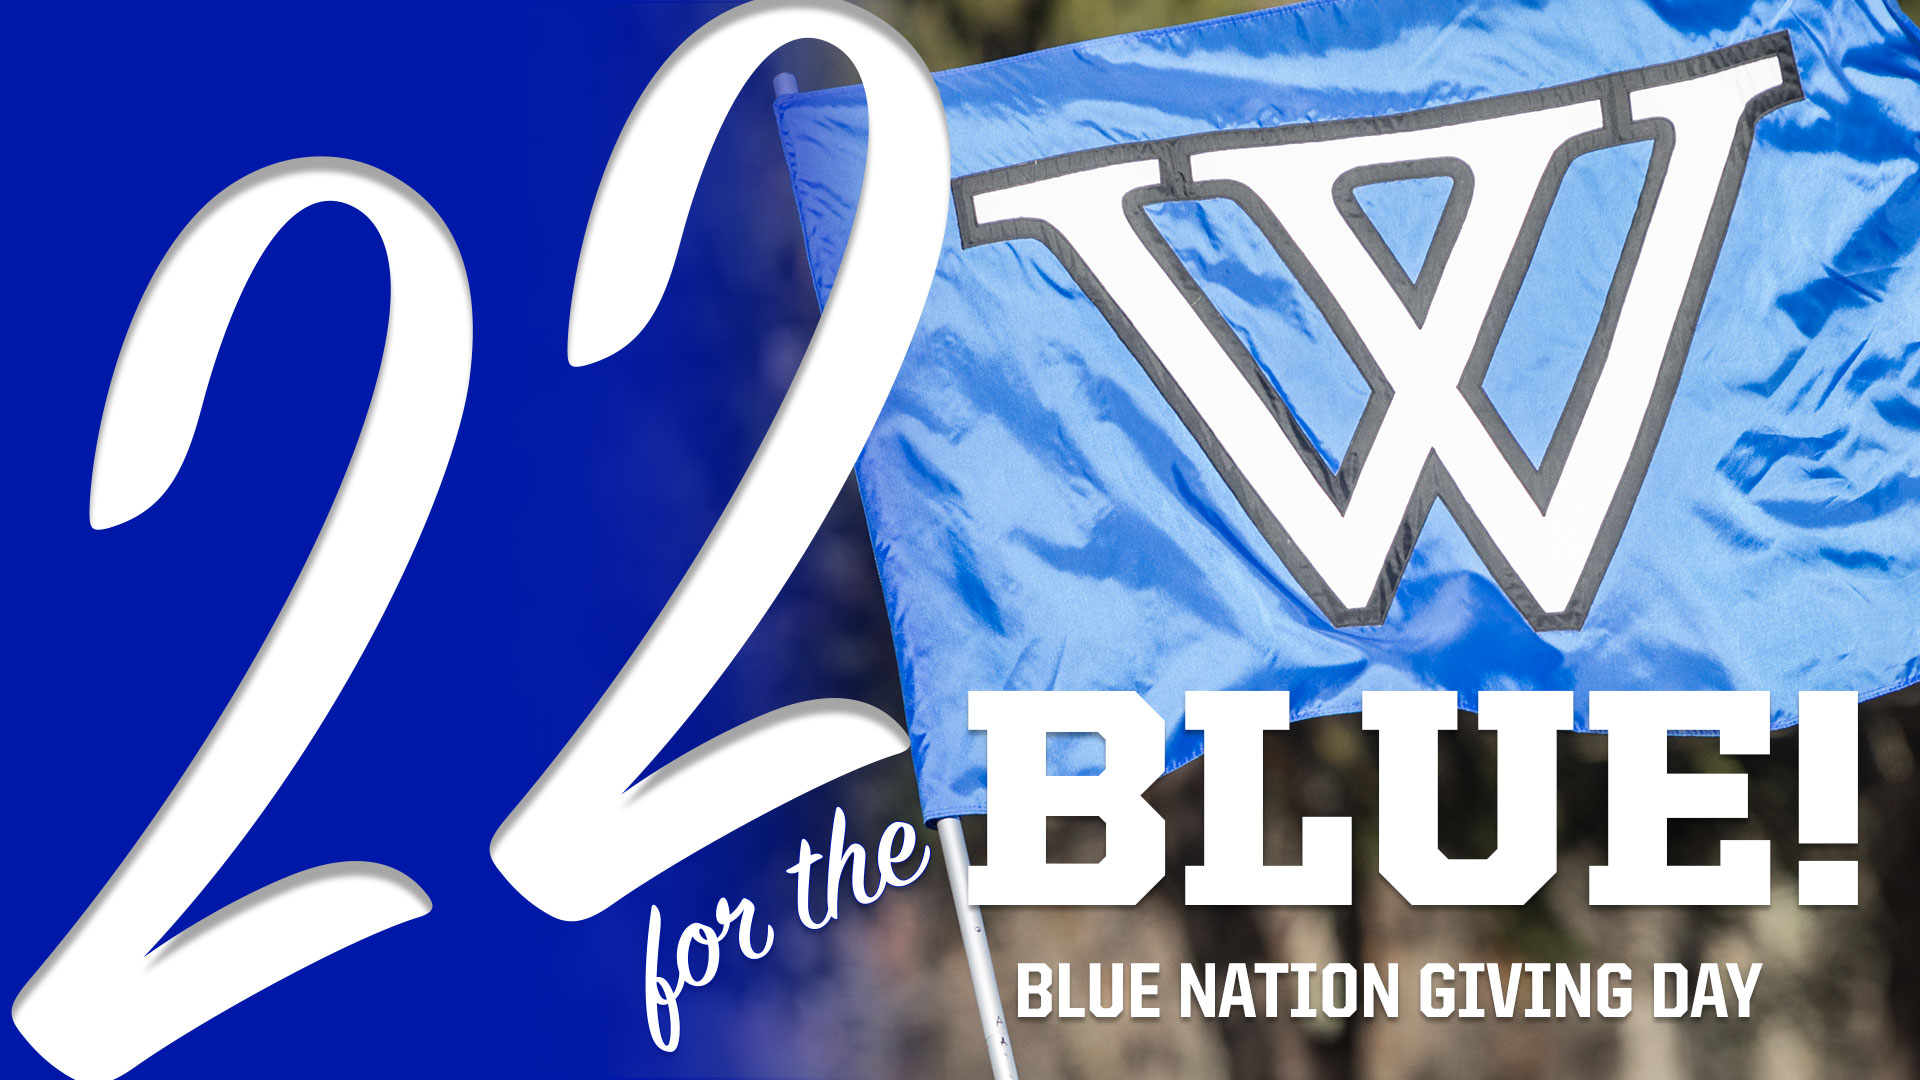 Blue Nation Giving Day